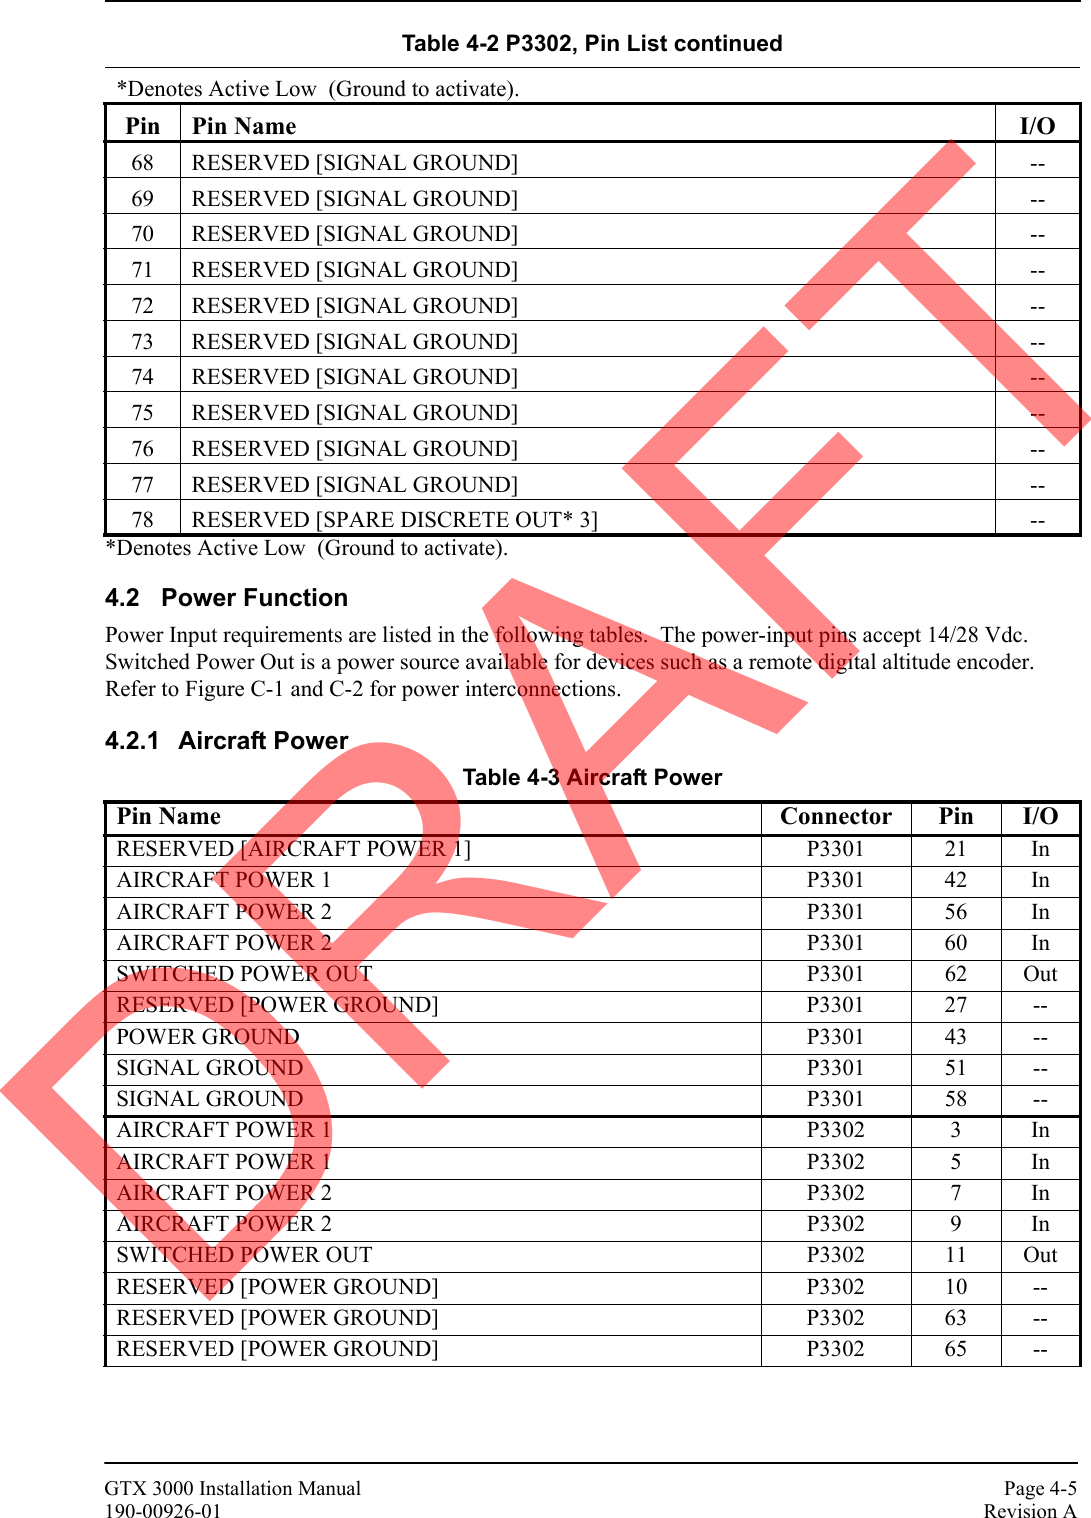 GTX 3000 Installation Manual Page 4-5190-00926-01 Revision A*Denotes Active Low  (Ground to activate).4.2 Power FunctionPower Input requirements are listed in the following tables.  The power-input pins accept 14/28 Vdc.  Switched Power Out is a power source available for devices such as a remote digital altitude encoder.  Refer to Figure C-1 and C-2 for power interconnections.4.2.1 Aircraft Power*Denotes Active Low  (Ground to activate).Pin Pin Name I/O68 RESERVED [SIGNAL GROUND] --69 RESERVED [SIGNAL GROUND] --70 RESERVED [SIGNAL GROUND] --71 RESERVED [SIGNAL GROUND] --72 RESERVED [SIGNAL GROUND] --73 RESERVED [SIGNAL GROUND] --74 RESERVED [SIGNAL GROUND] --75 RESERVED [SIGNAL GROUND] --76 RESERVED [SIGNAL GROUND] --77 RESERVED [SIGNAL GROUND] --78 RESERVED [SPARE DISCRETE OUT* 3] --Table 4-3 Aircraft PowerPin Name Connector Pin I/ORESERVED [AIRCRAFT POWER 1] P3301 21 InAIRCRAFT POWER 1 P3301 42 InAIRCRAFT POWER 2 P3301 56 InAIRCRAFT POWER 2 P3301 60 InSWITCHED POWER OUT P3301 62 OutRESERVED [POWER GROUND] P3301 27 --POWER GROUND P3301 43 --SIGNAL GROUND P3301 51 --SIGNAL GROUND P3301 58 --AIRCRAFT POWER 1 P3302 3 InAIRCRAFT POWER 1 P3302 5 InAIRCRAFT POWER 2 P3302 7 InAIRCRAFT POWER 2 P3302 9 InSWITCHED POWER OUT P3302 11 OutRESERVED [POWER GROUND] P3302 10 --RESERVED [POWER GROUND] P3302 63 --RESERVED [POWER GROUND] P3302 65 --Table 4-2 P3302, Pin List continuedDRAFT